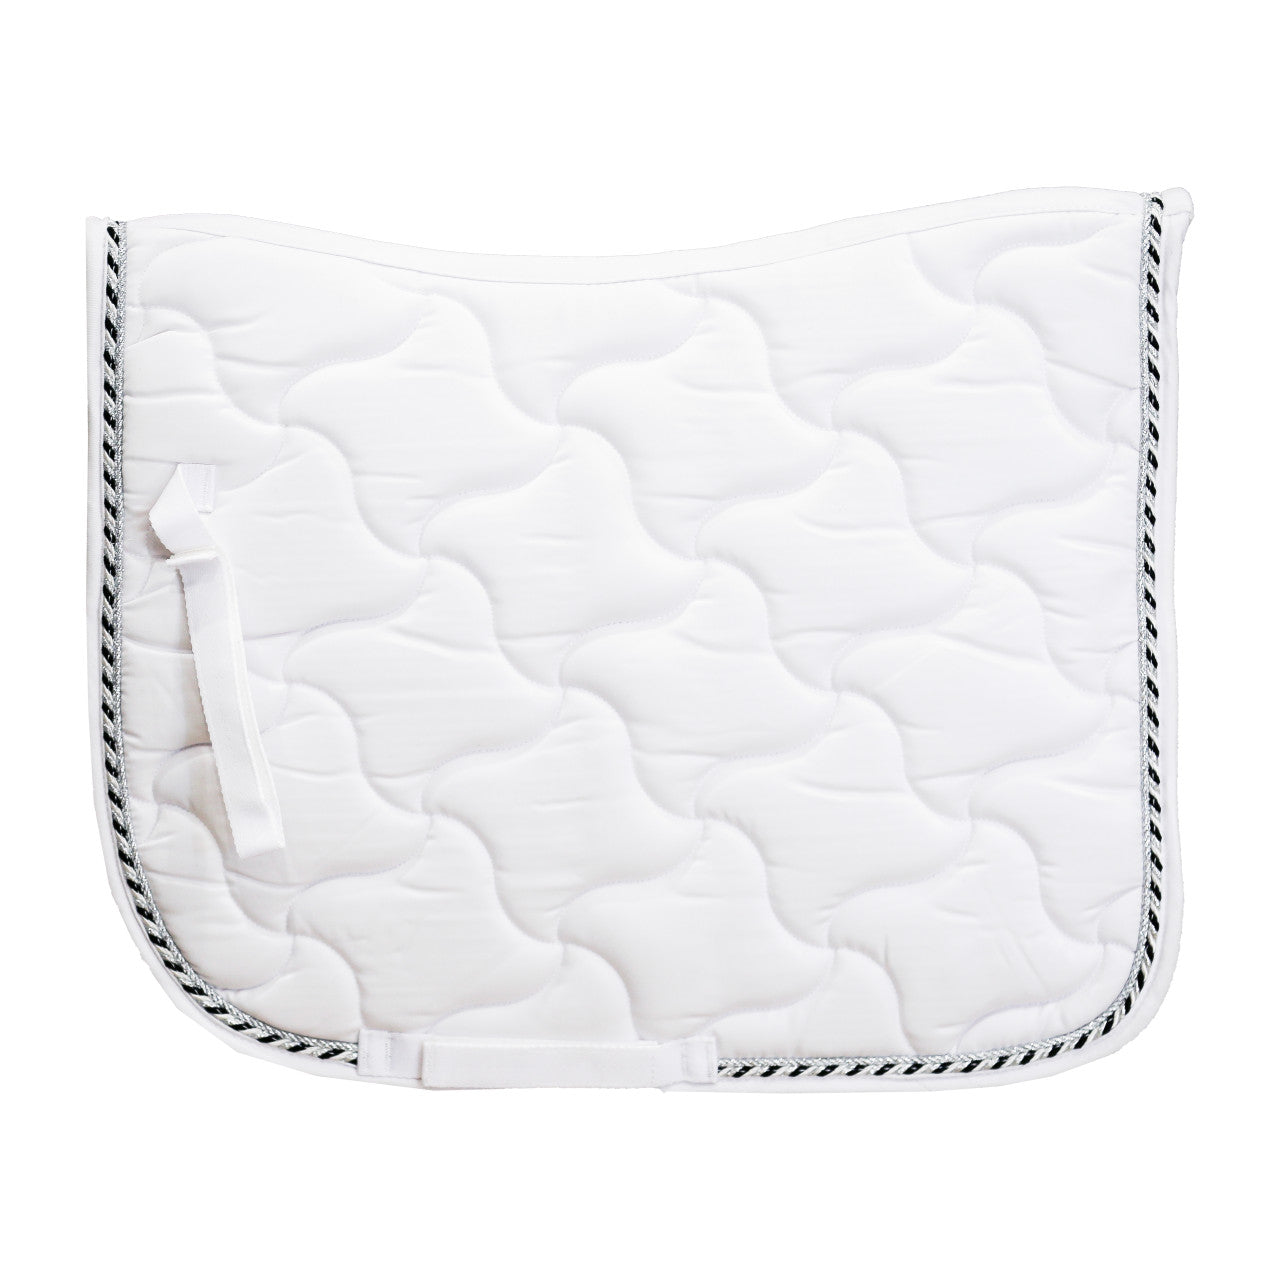 Competition White Dressage Saddle Pad - White Binding -  LOW STOCK...LAST FEW LEFT!!!